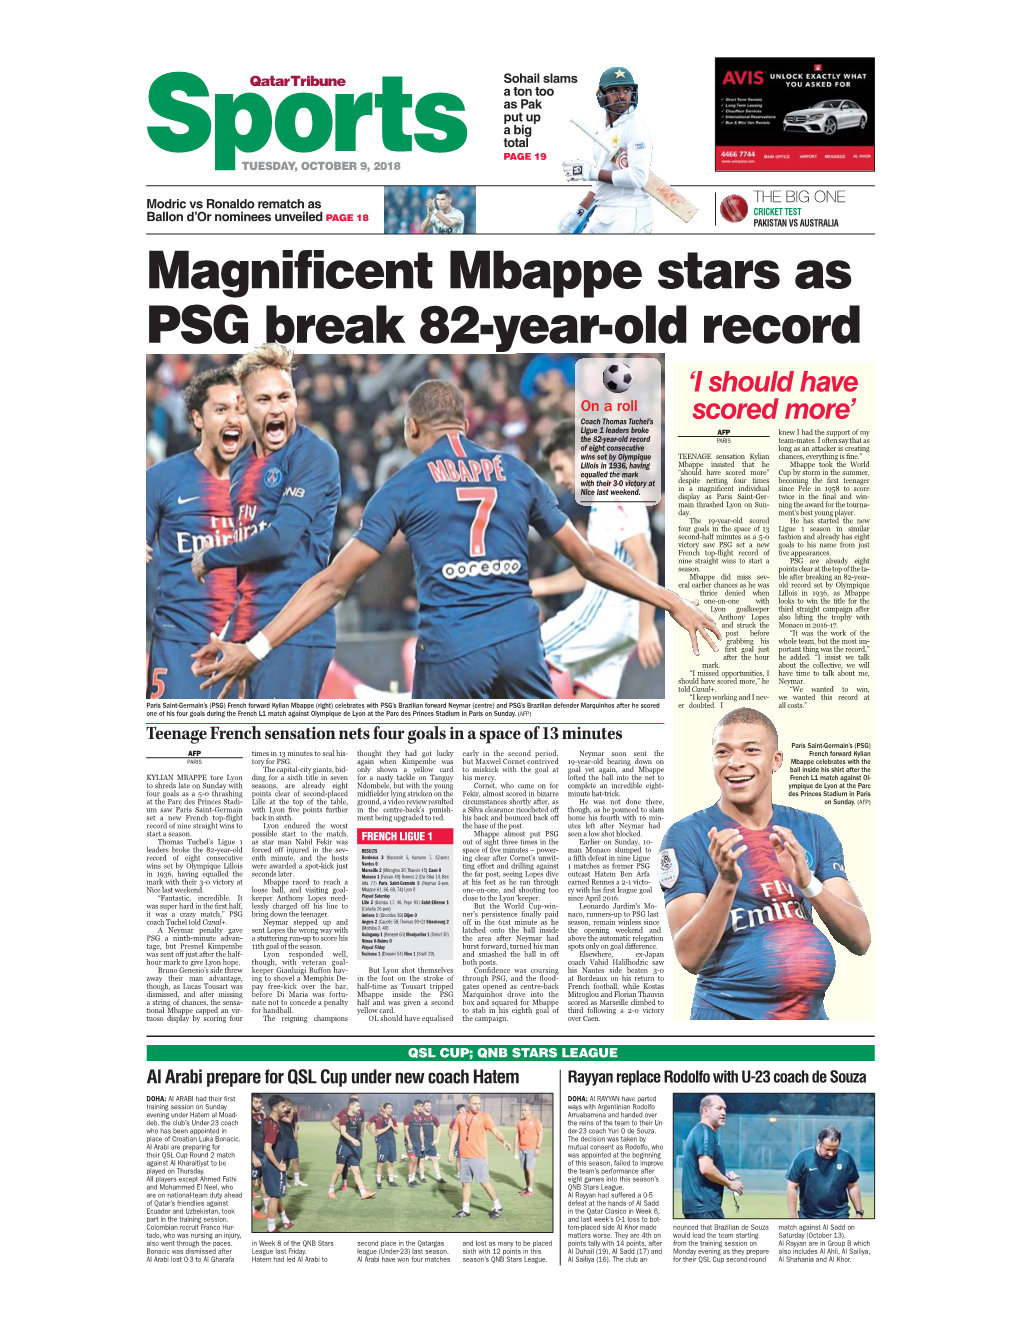 Magnificent Mbappe Stars As PSG Break 82-Year-Old Record